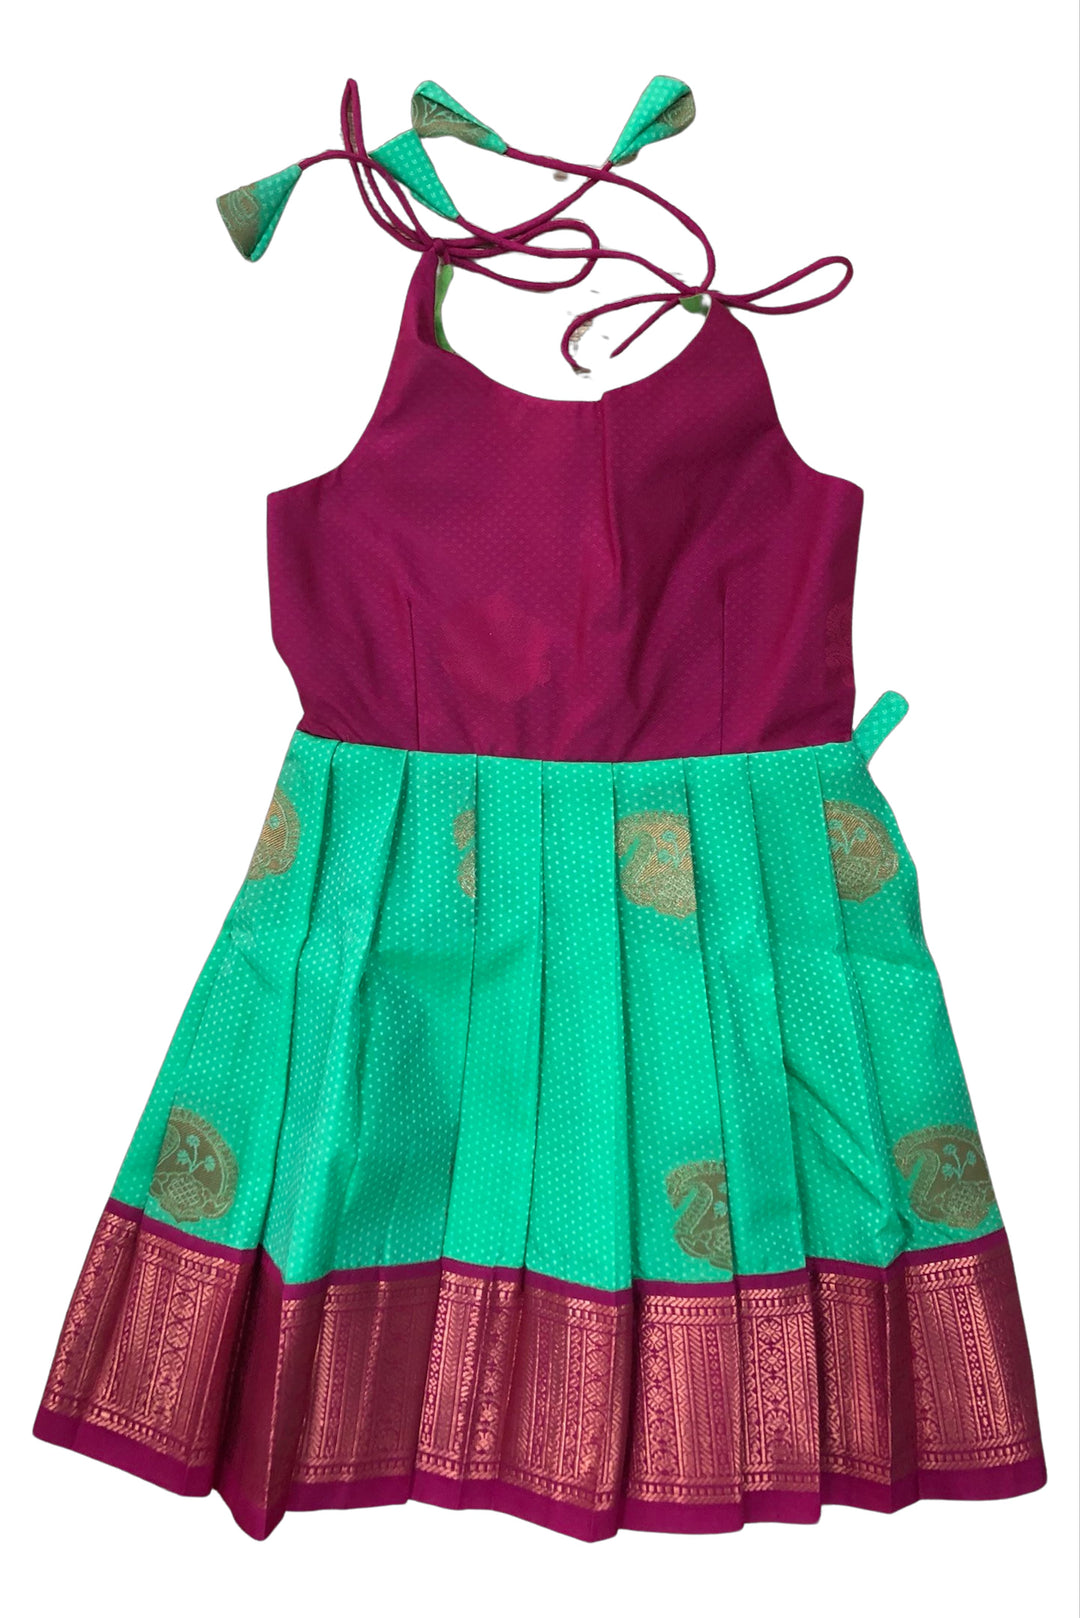 The Nesavu Tie-up Frock Elegant Purple and Green Silk Tie Up Frock with Golden Zari for Kids Nesavu 18 (2Y) / Green / Style 3 T302C-18 Traditional Purple & Green Silk Frock with Zari for Girls | The Nesavu